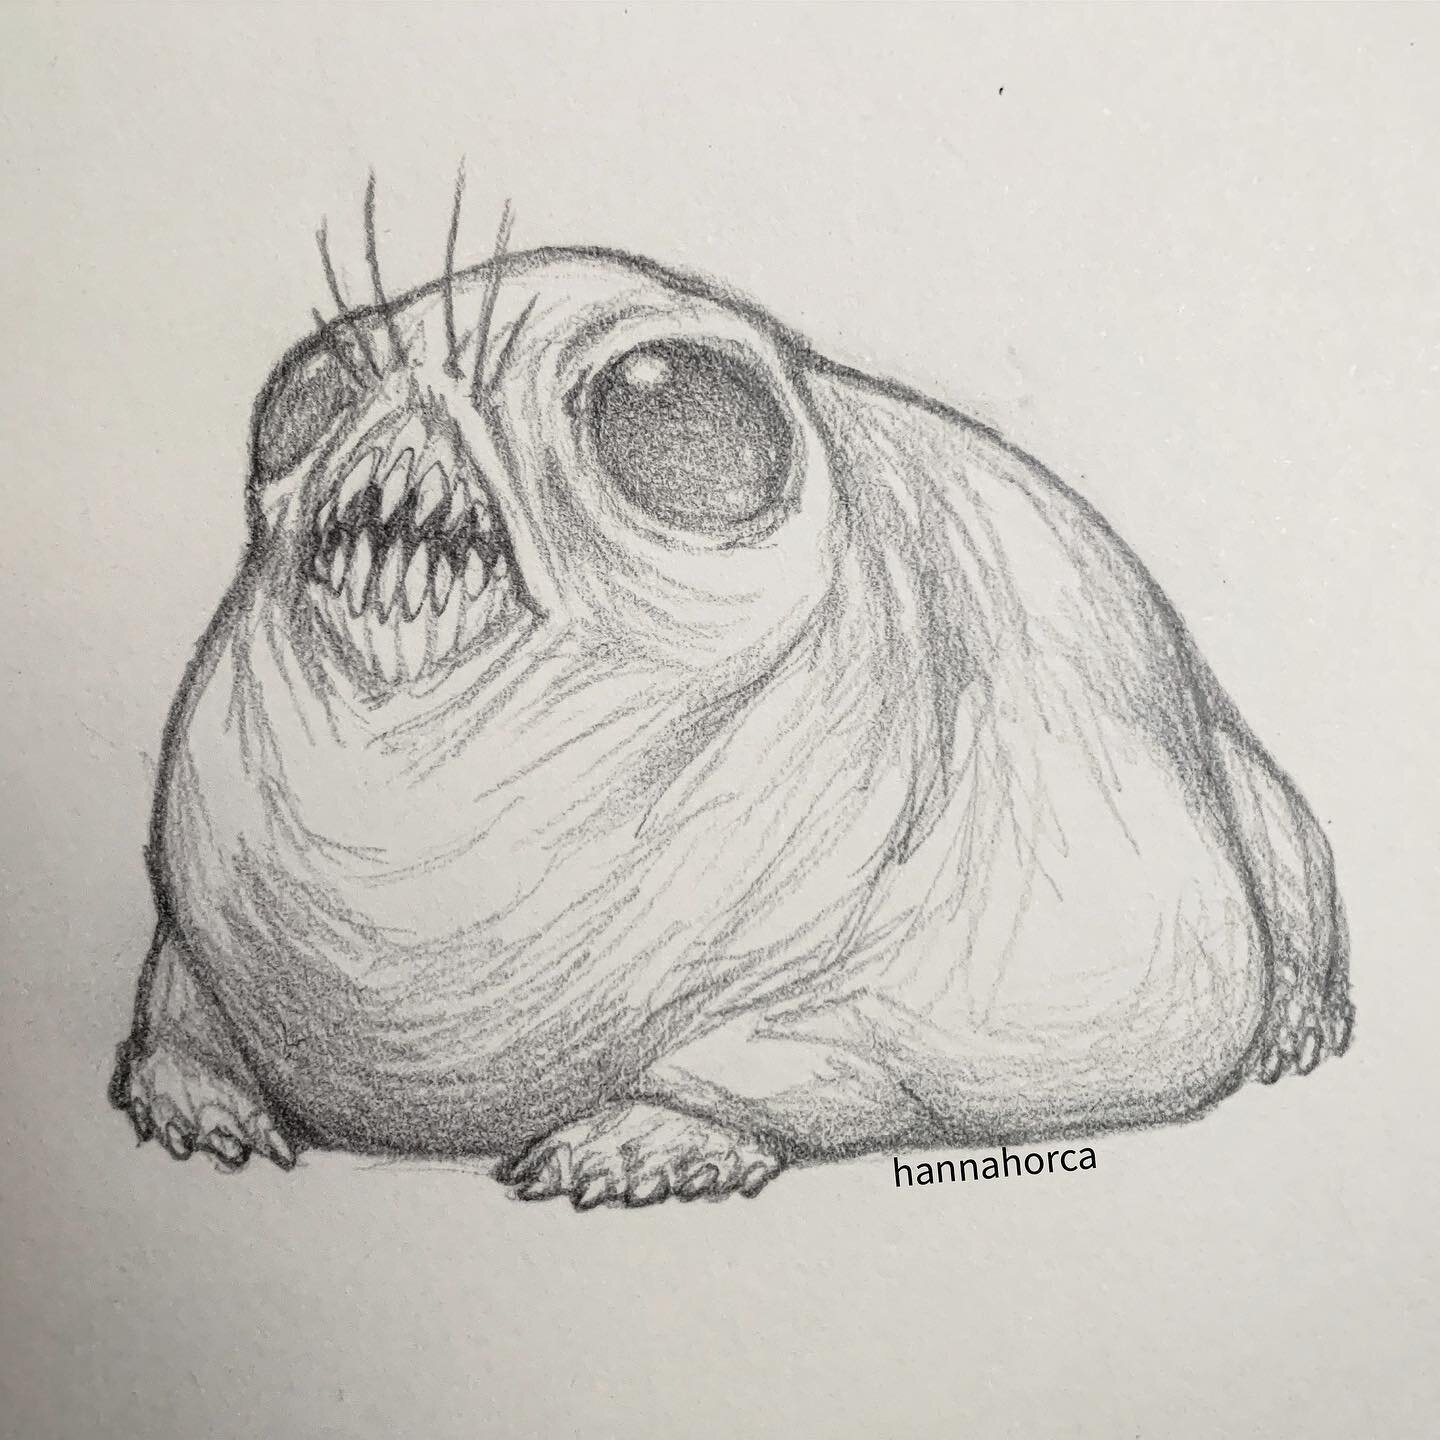 Blobby

#sketch #drawing #creature #creaturedesign #creatureart #creaturedrawing #pencildrawing #pencilsketch